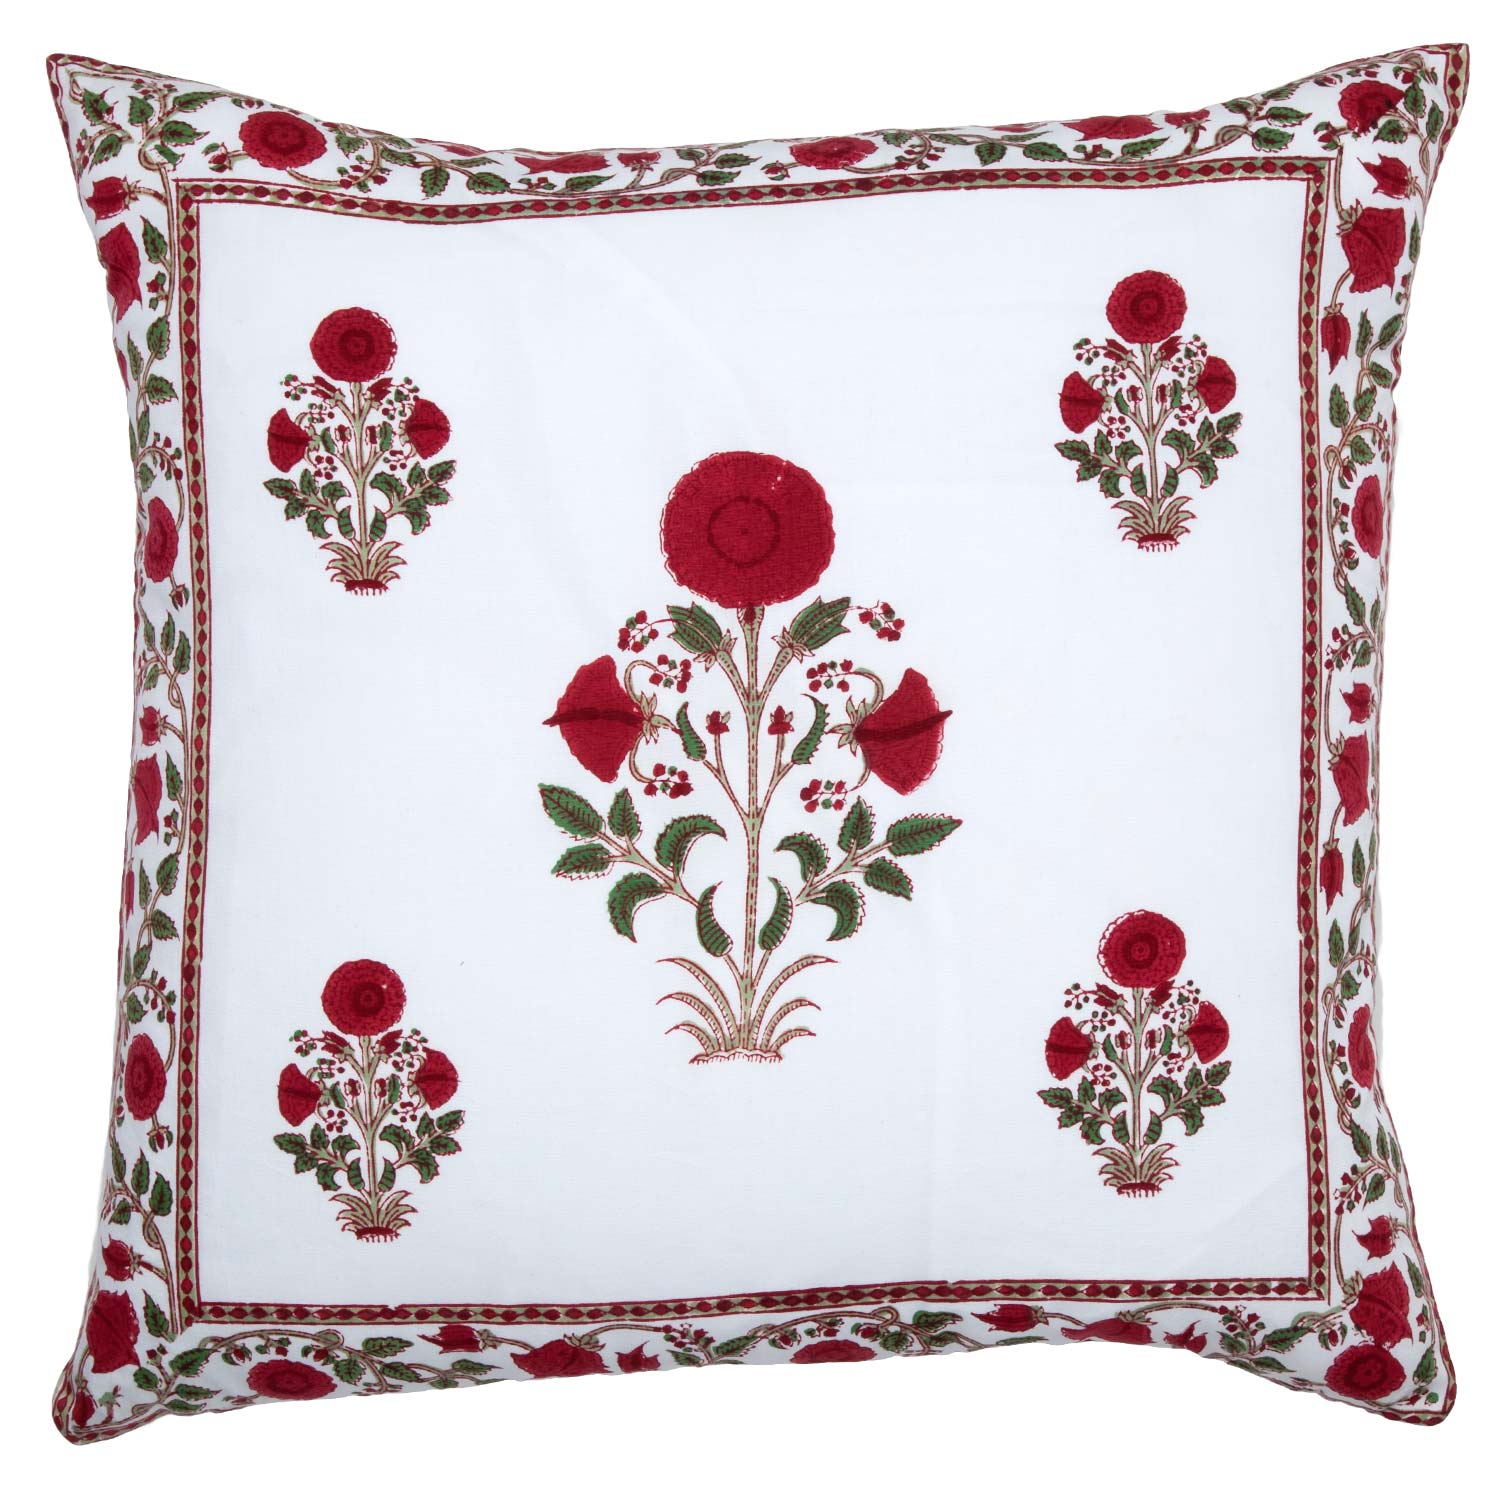 Block Printed Cushion Covers Cotton Pillow Cover Decorative Floral Pillow Covers 